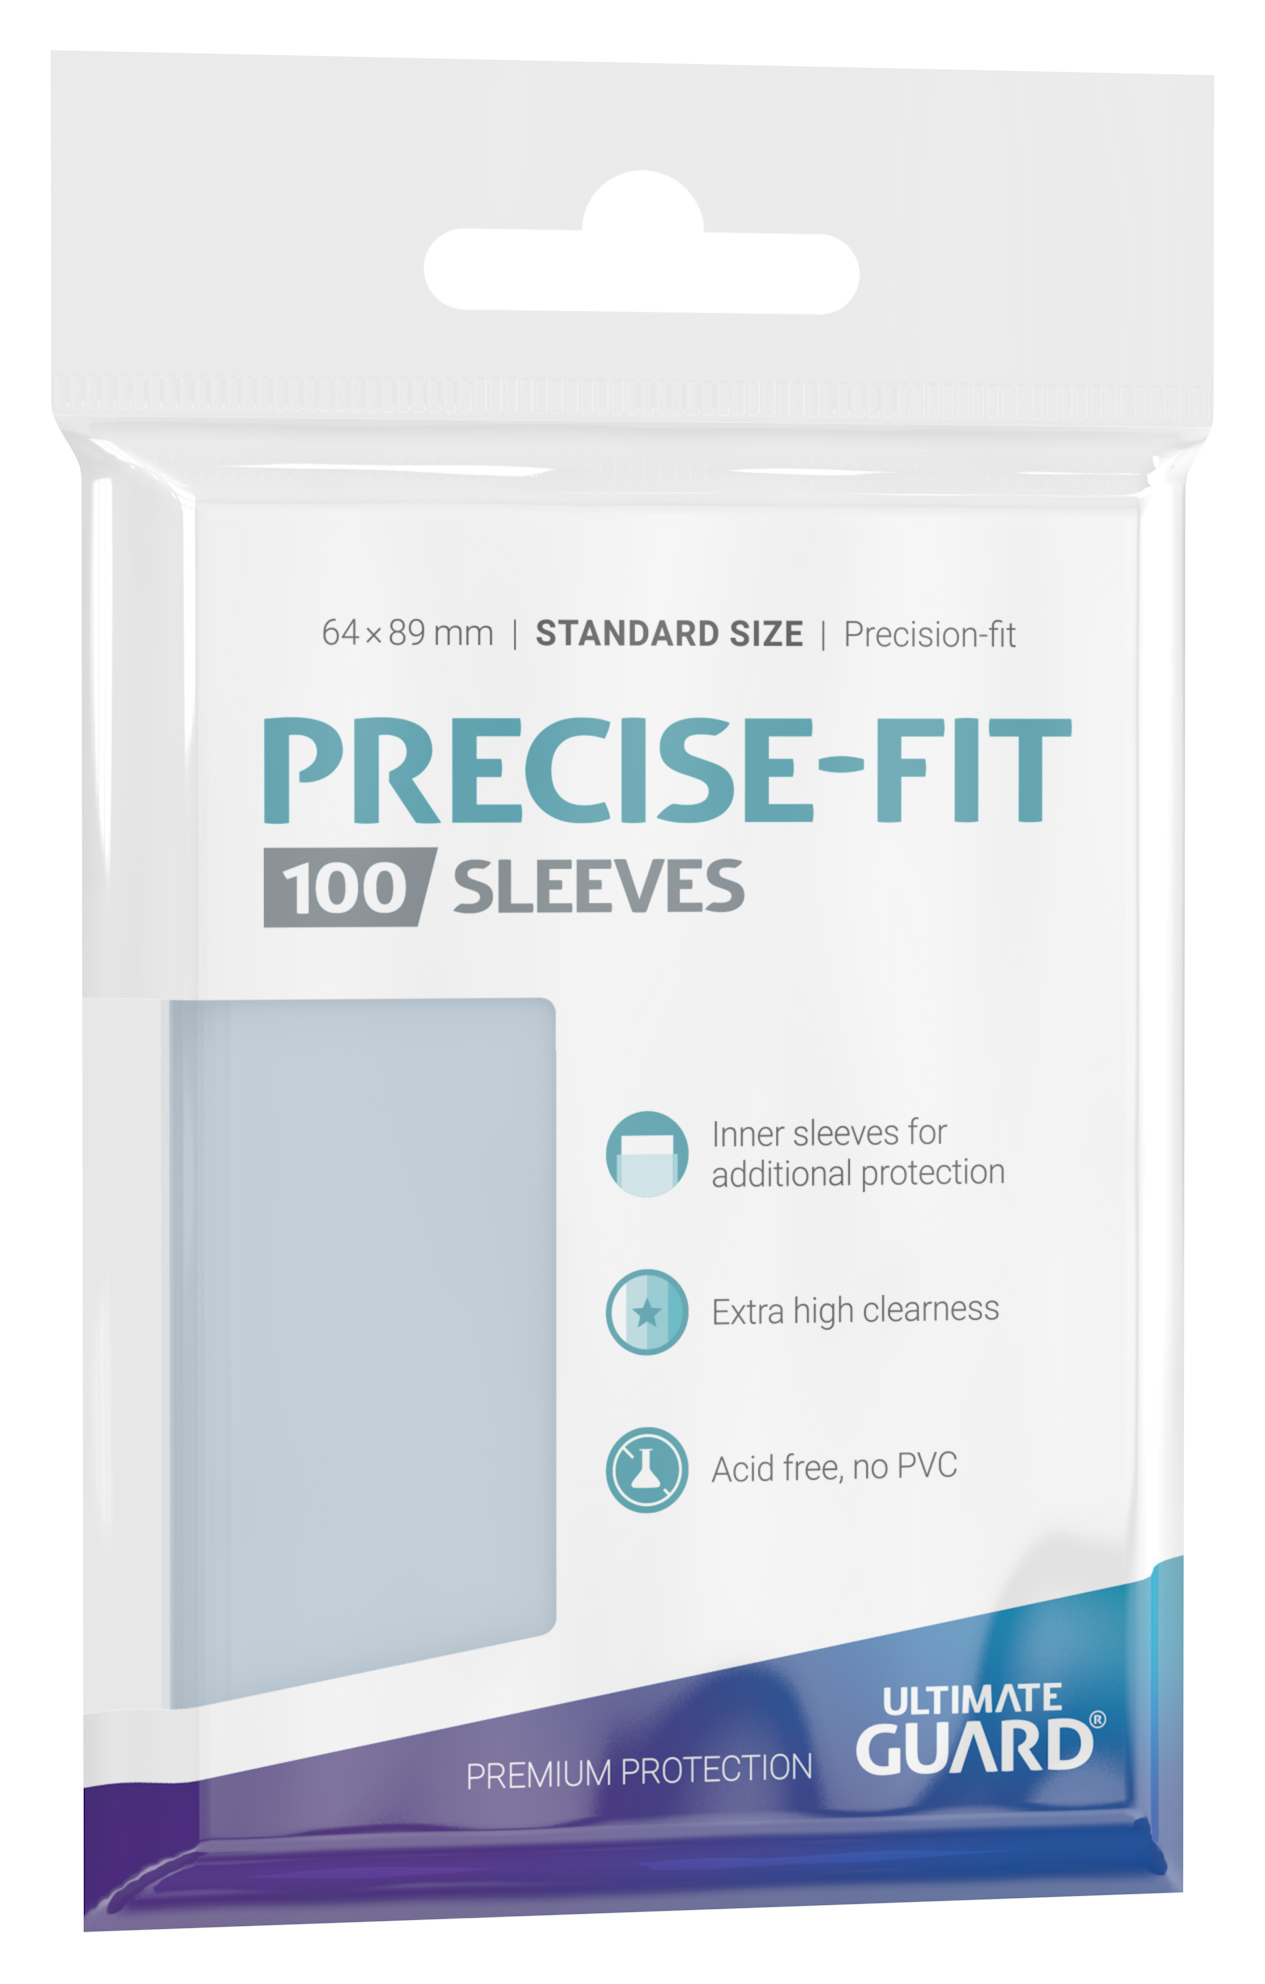 Precise-Fit Sleeves